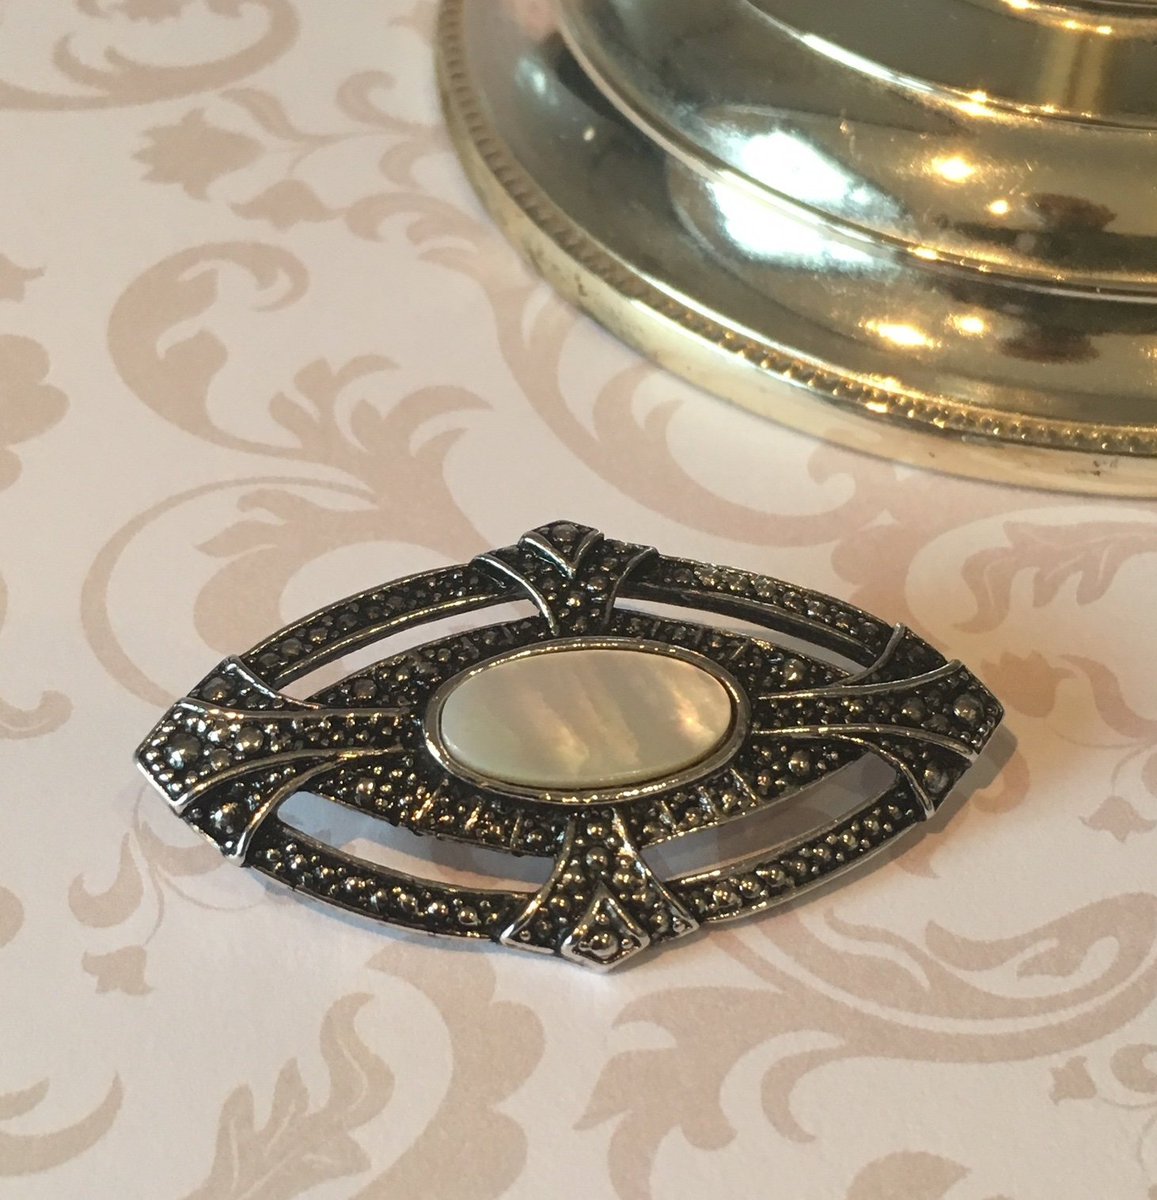 Excited to share the latest addition to my #etsy shop: Beautiful Silver Tone Brooch with Mother of Pearl Centre etsy.me/2Dn5PUv #jewellery #brooch #silver #marcasitebrooch #ovalbrooch #costumejewellery #ladiesbrooch #silverbrooch #motherofpearl